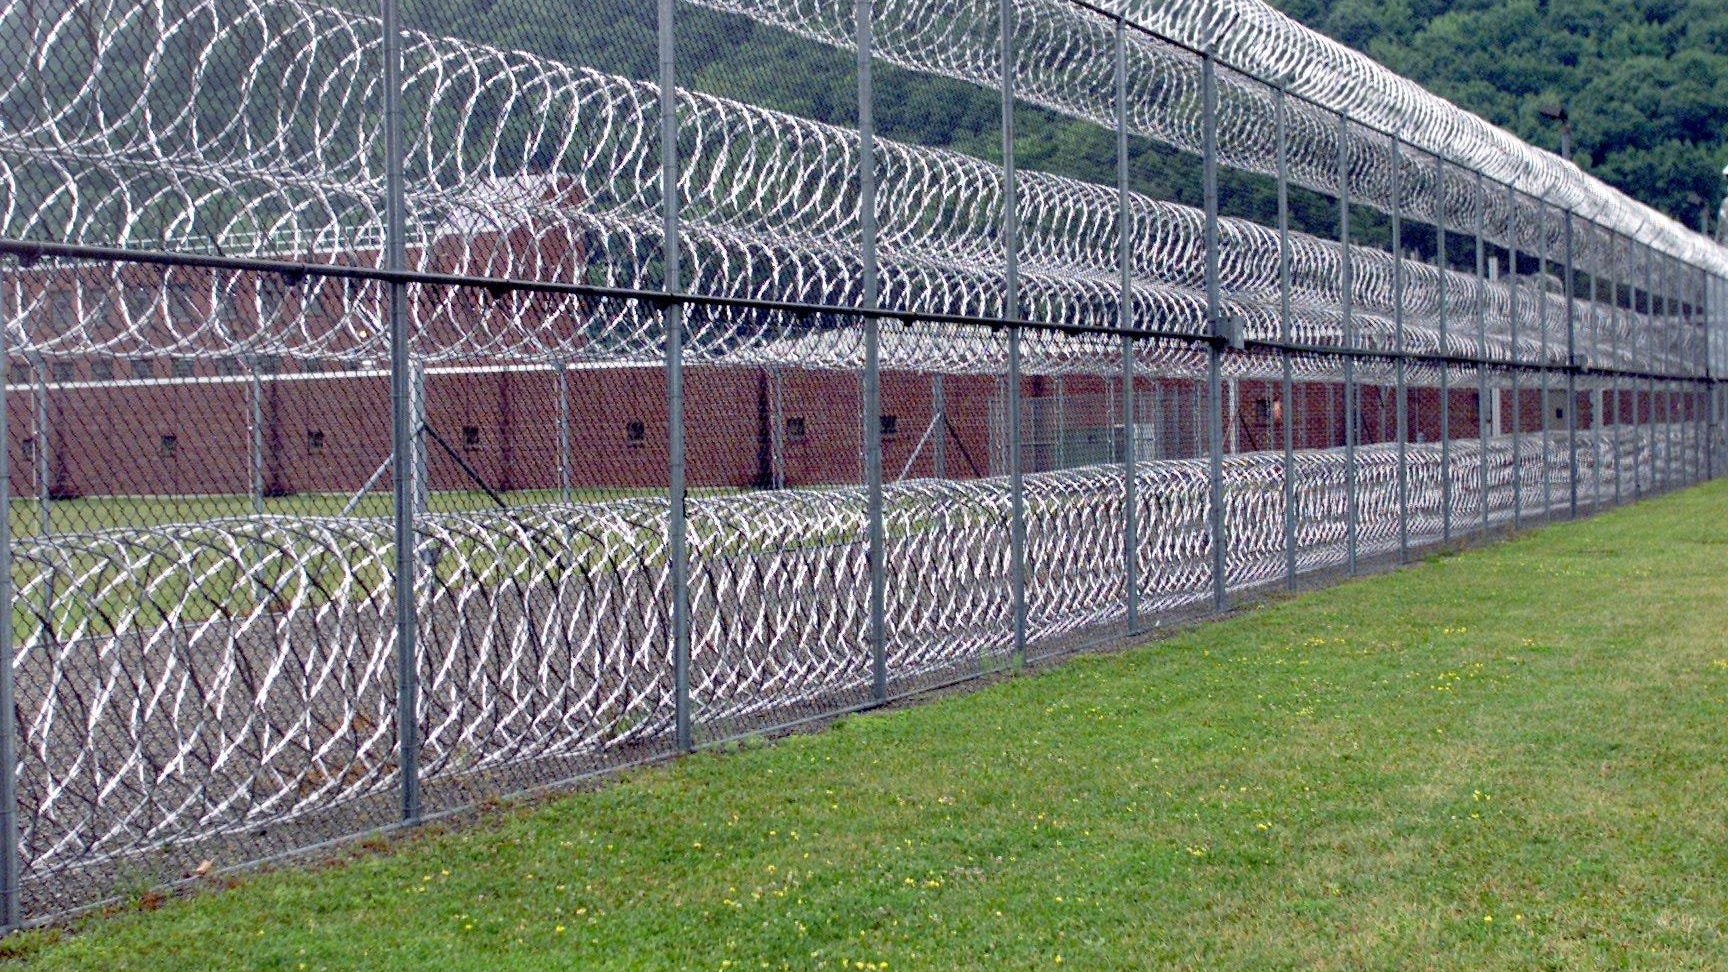 New York to close two prisons as part of state budget, but where?